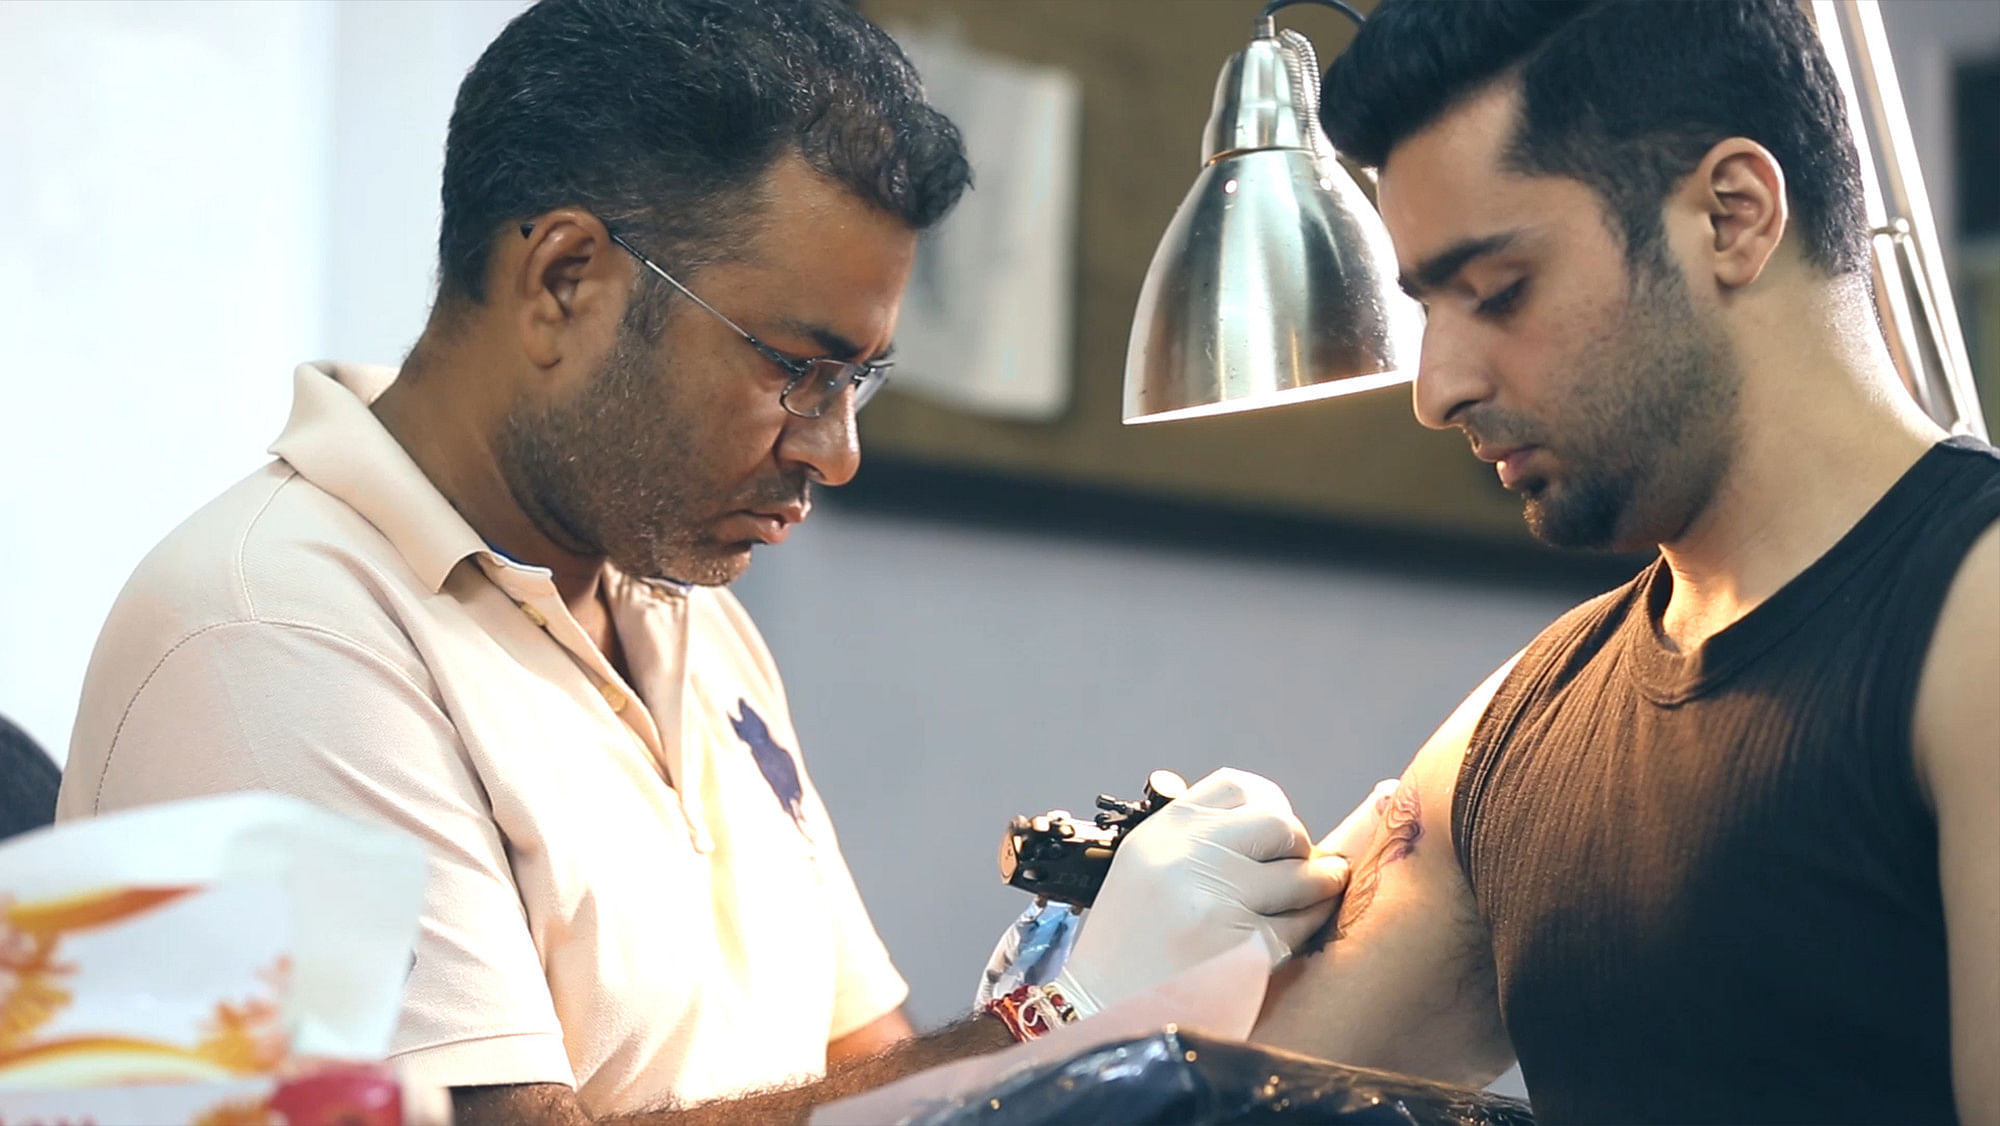 Manjeet Singh is listed in the top 100 global tattoo artists. (Photo: <b>The Quint</b>)